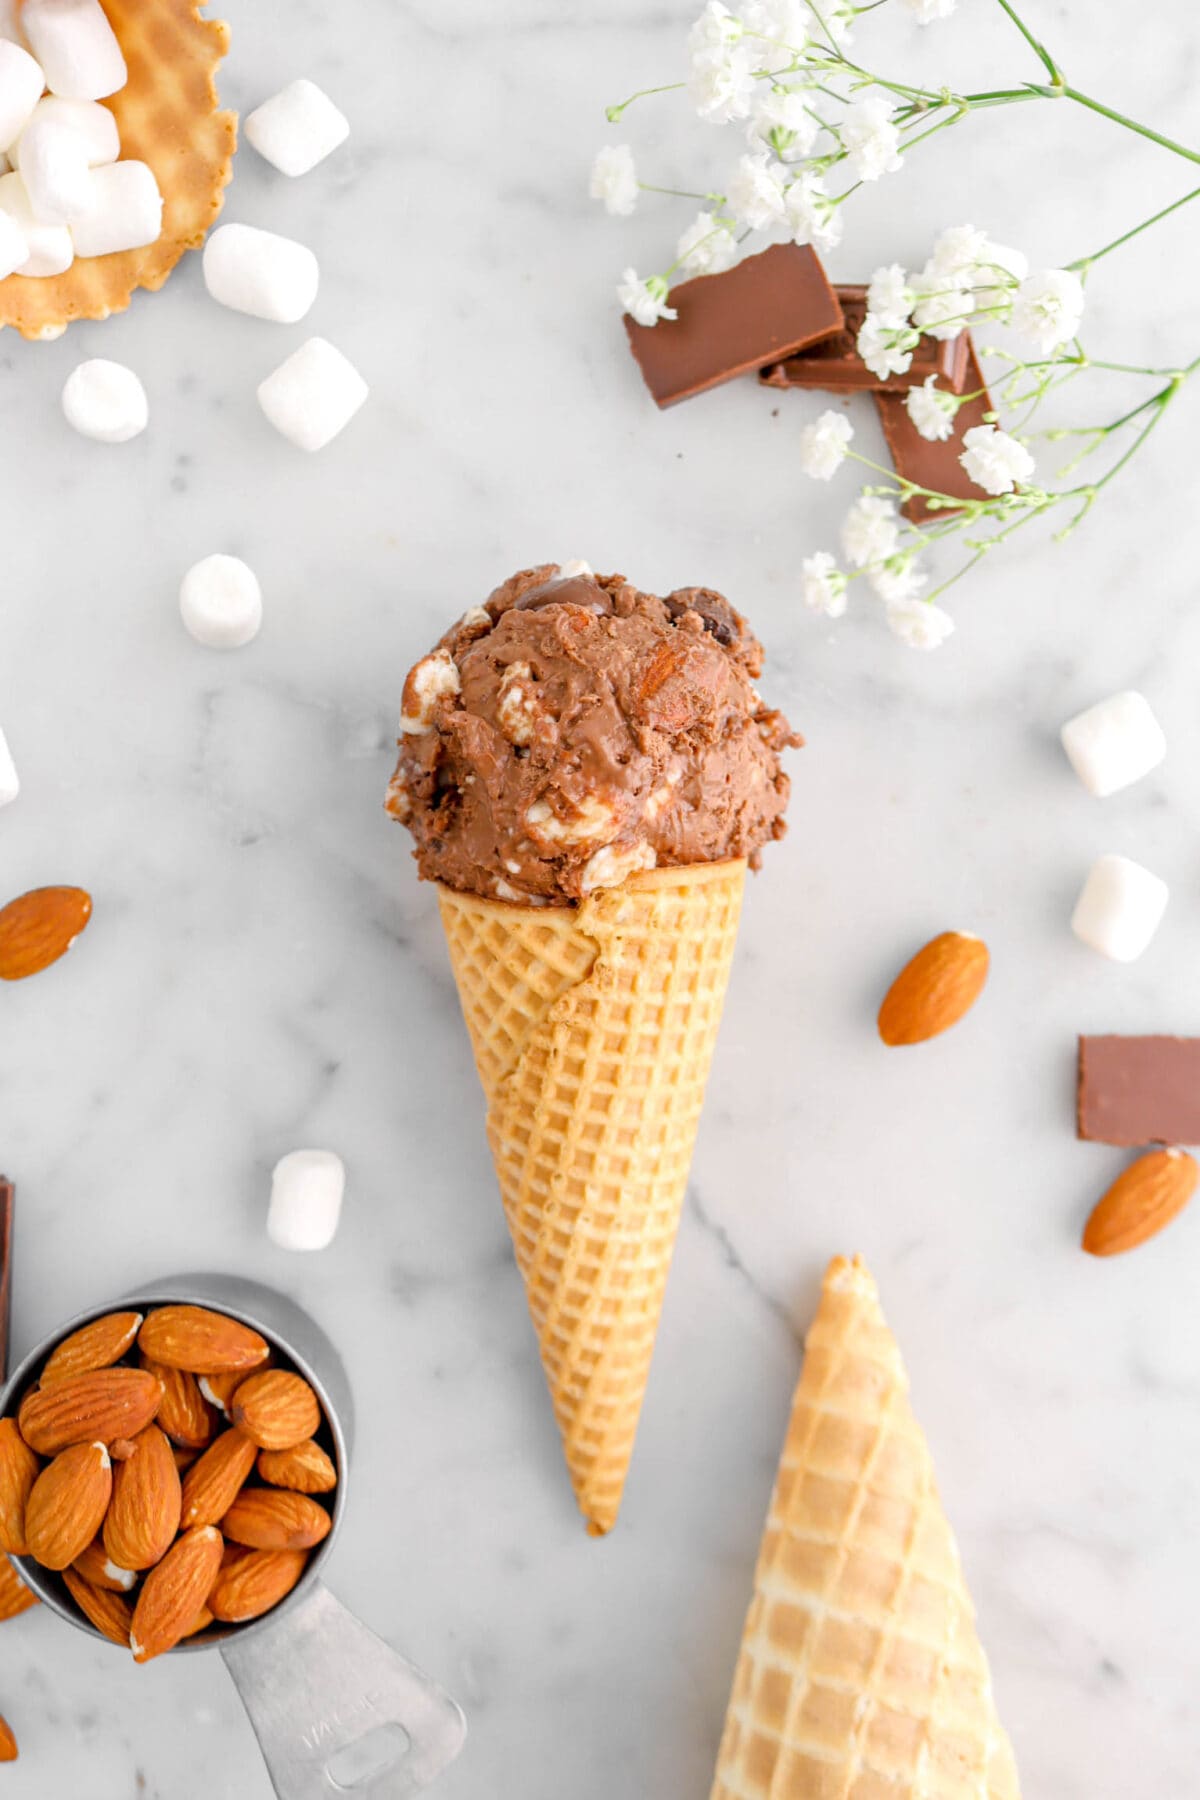 flat lay of rocky road ice cream scoop on marble surface with mini marshmallows, almonds, and chocolate pieces